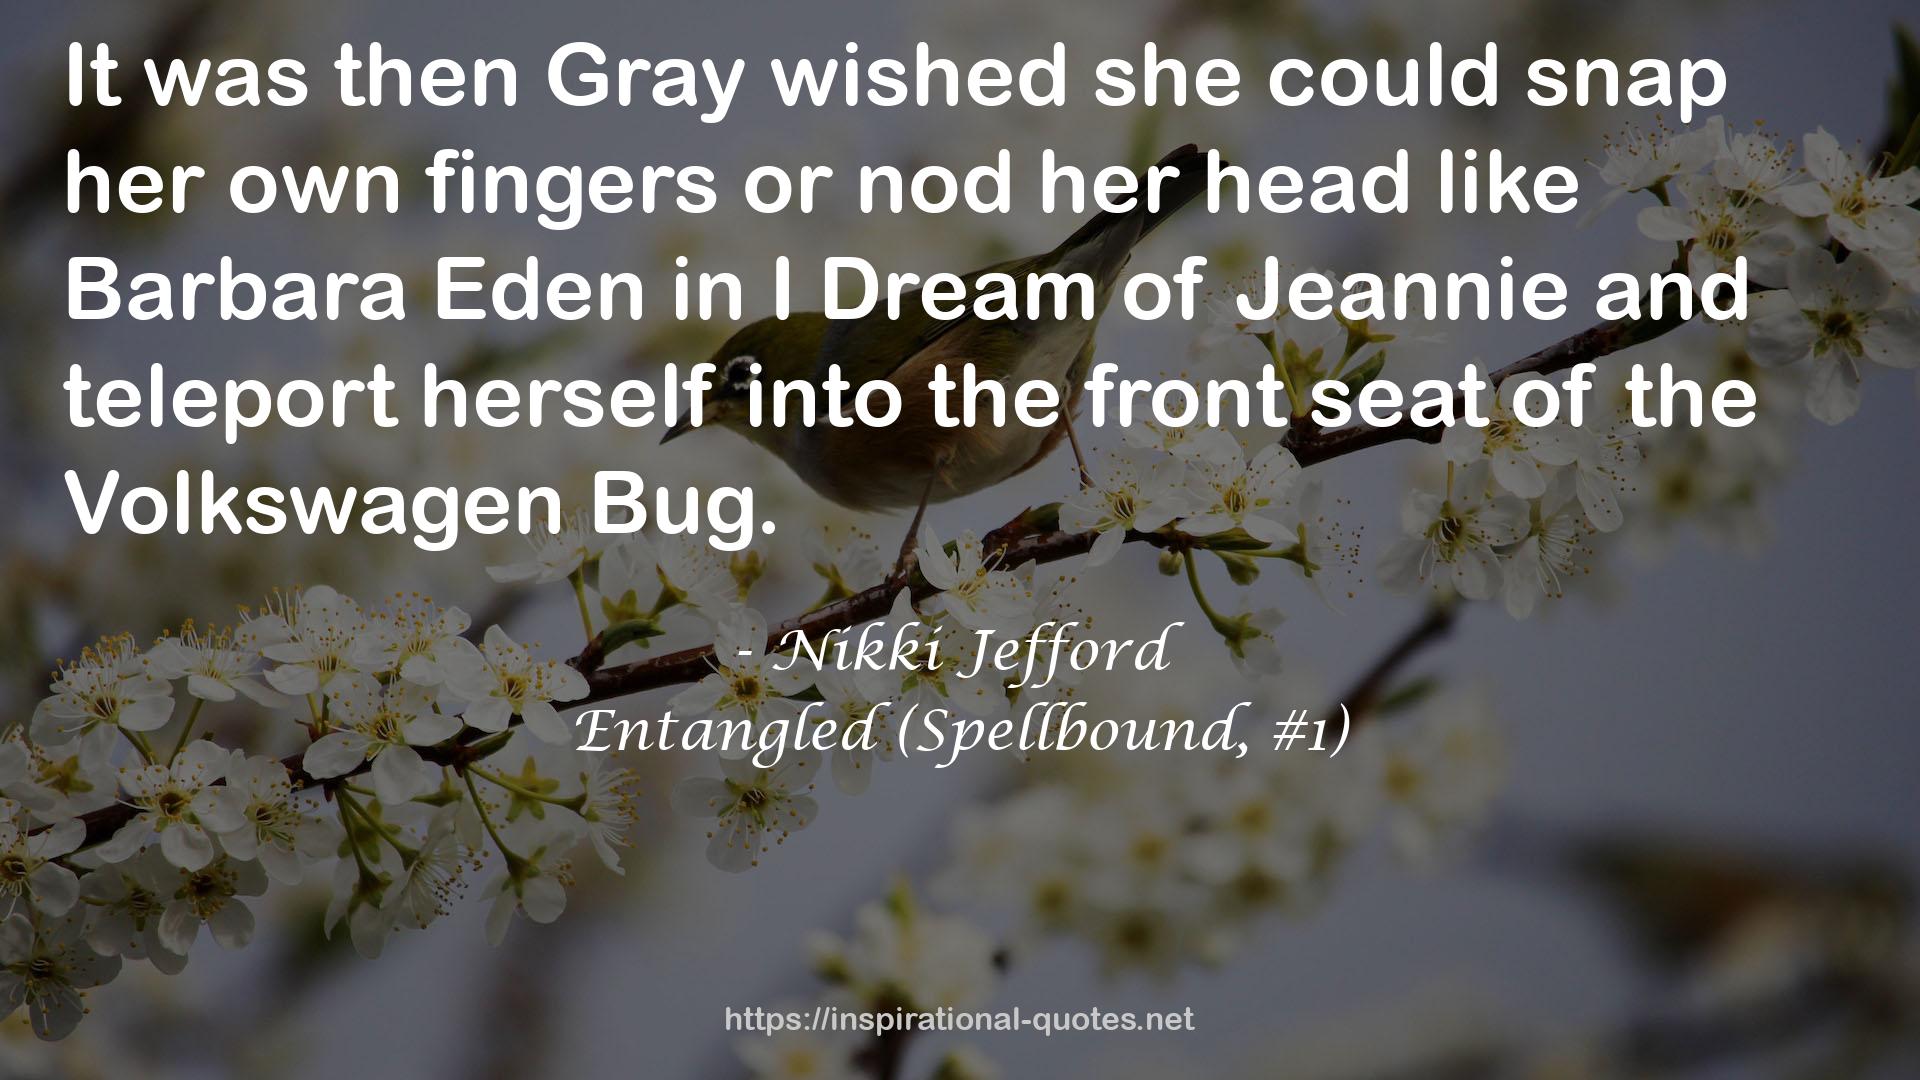 Entangled (Spellbound, #1) QUOTES